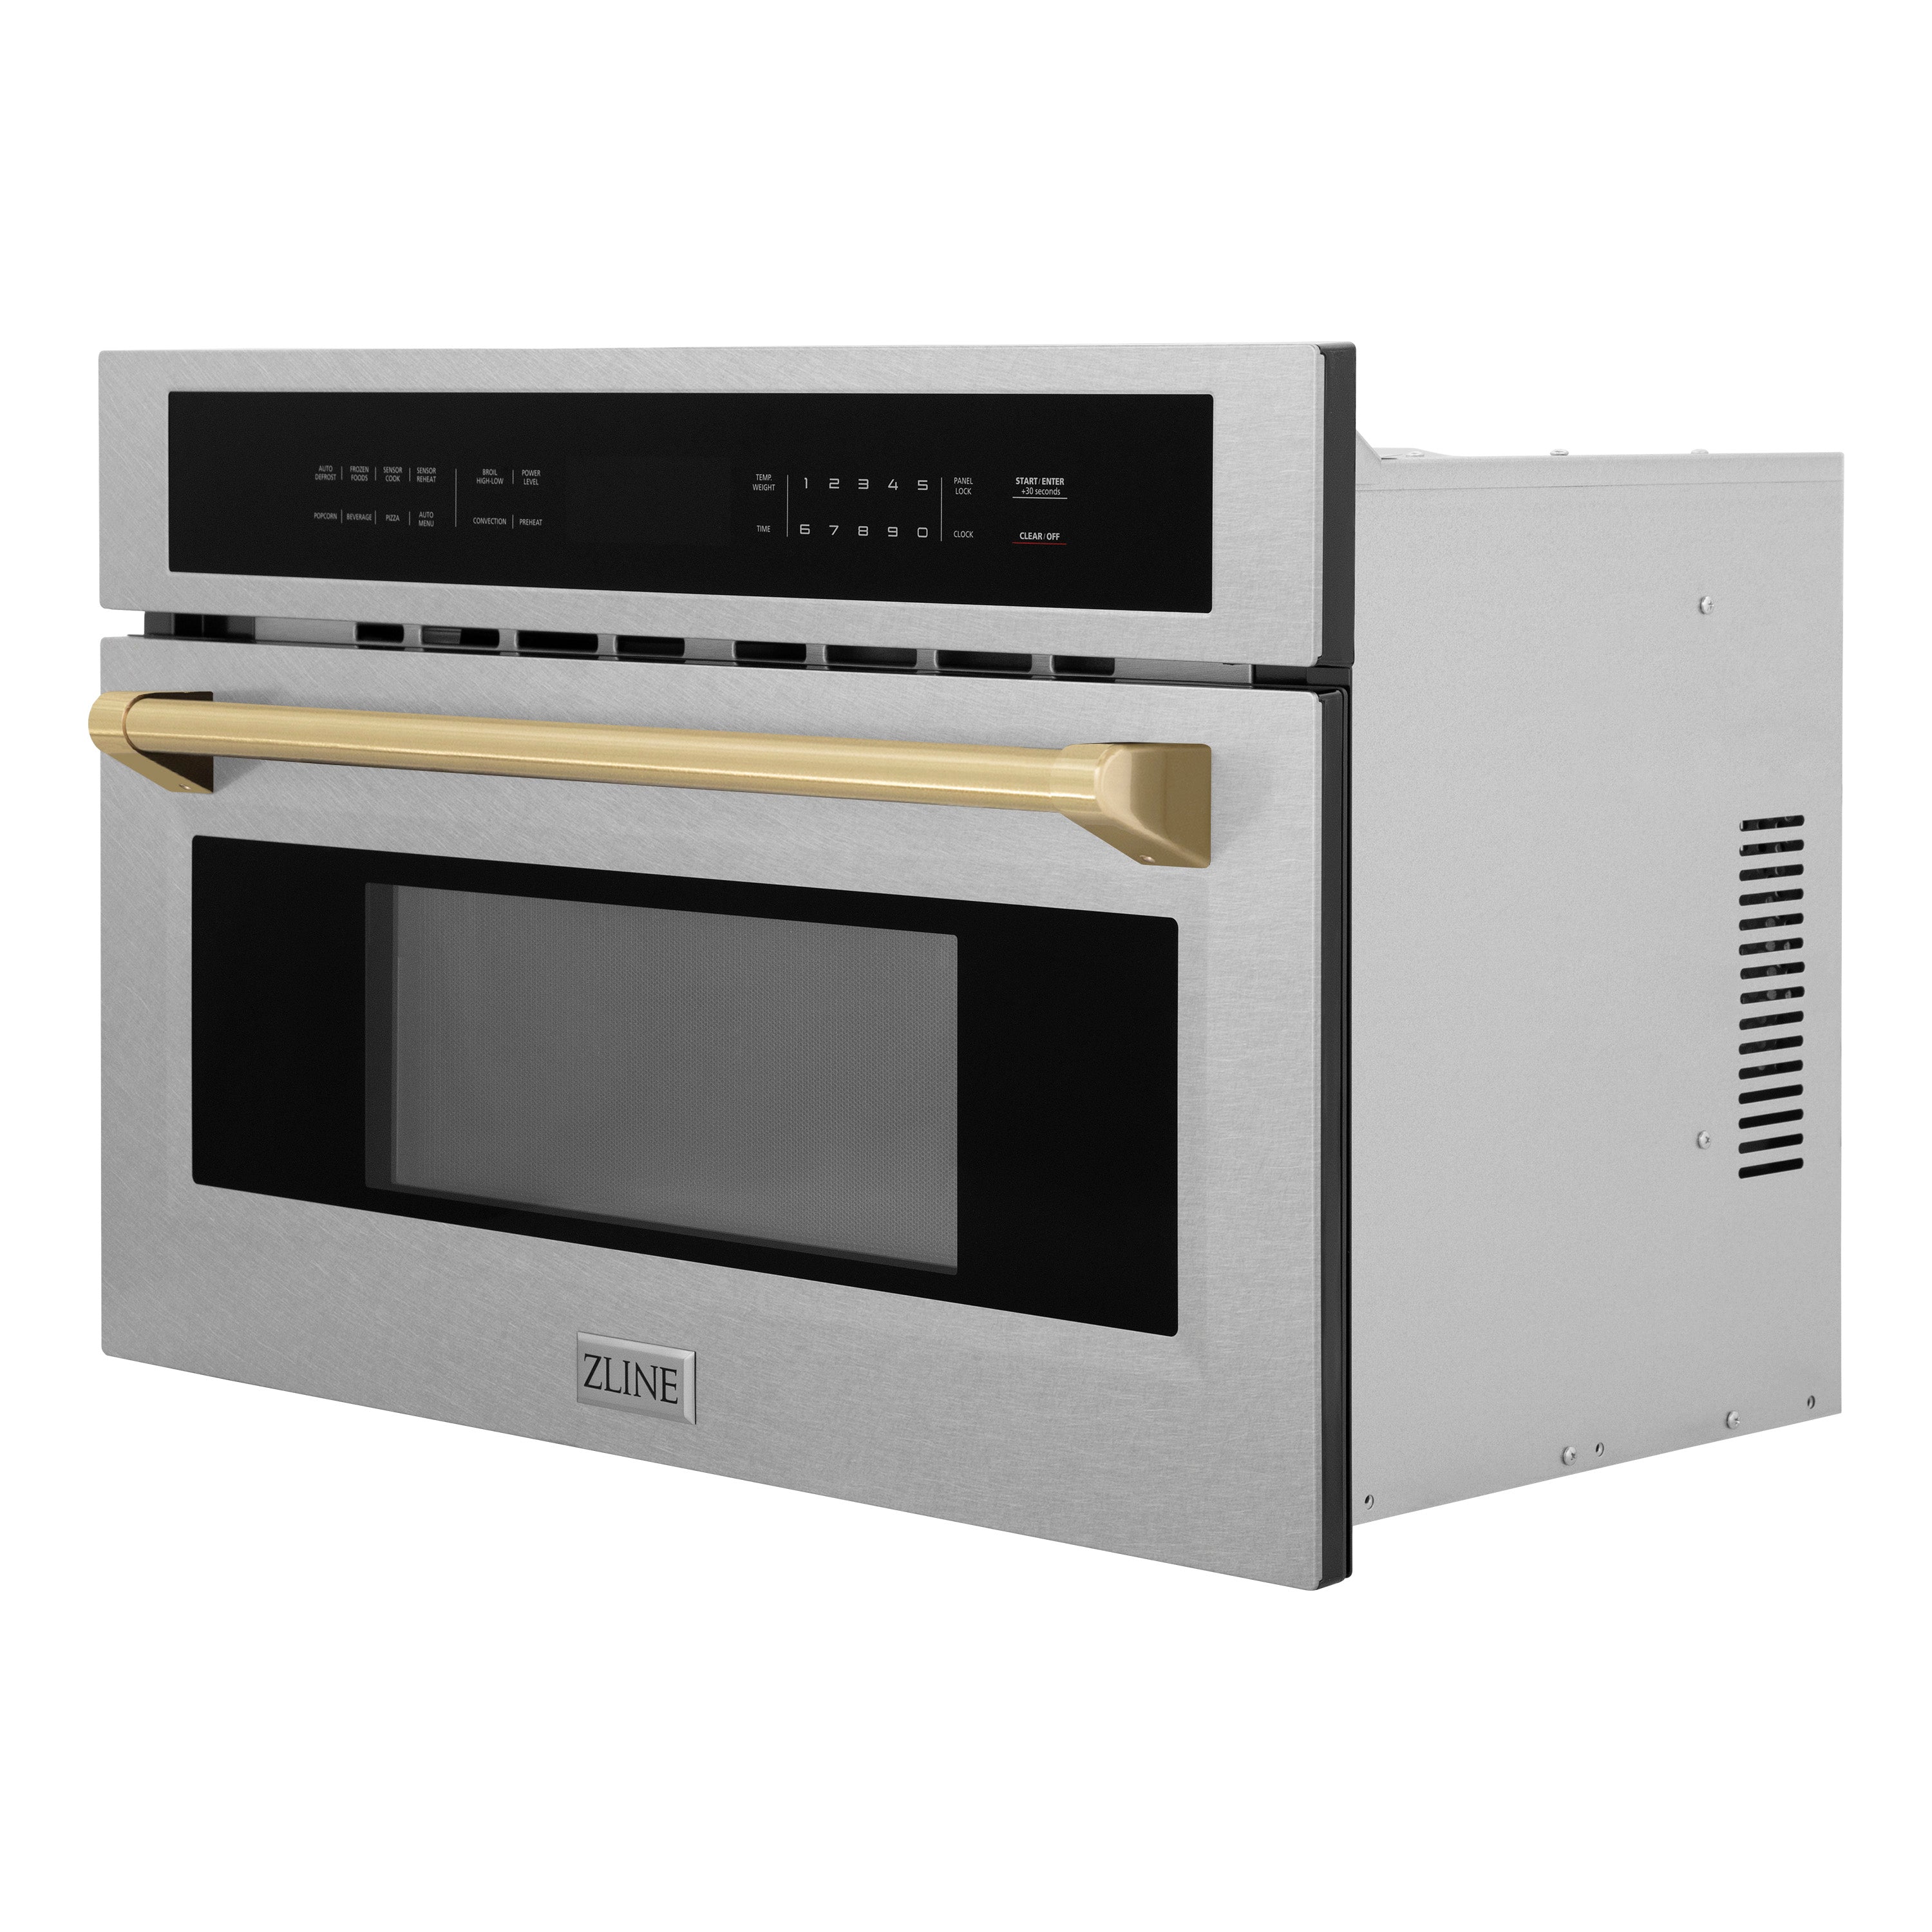 ZLINE Autograph Edition 30” 1.6 cu ft. Built-in Convection Microwave Oven in Fingerprint Resistant Stainless Steel and Champagne Bronze Accents (MWOZ-30-SS-CB) - New Star Living